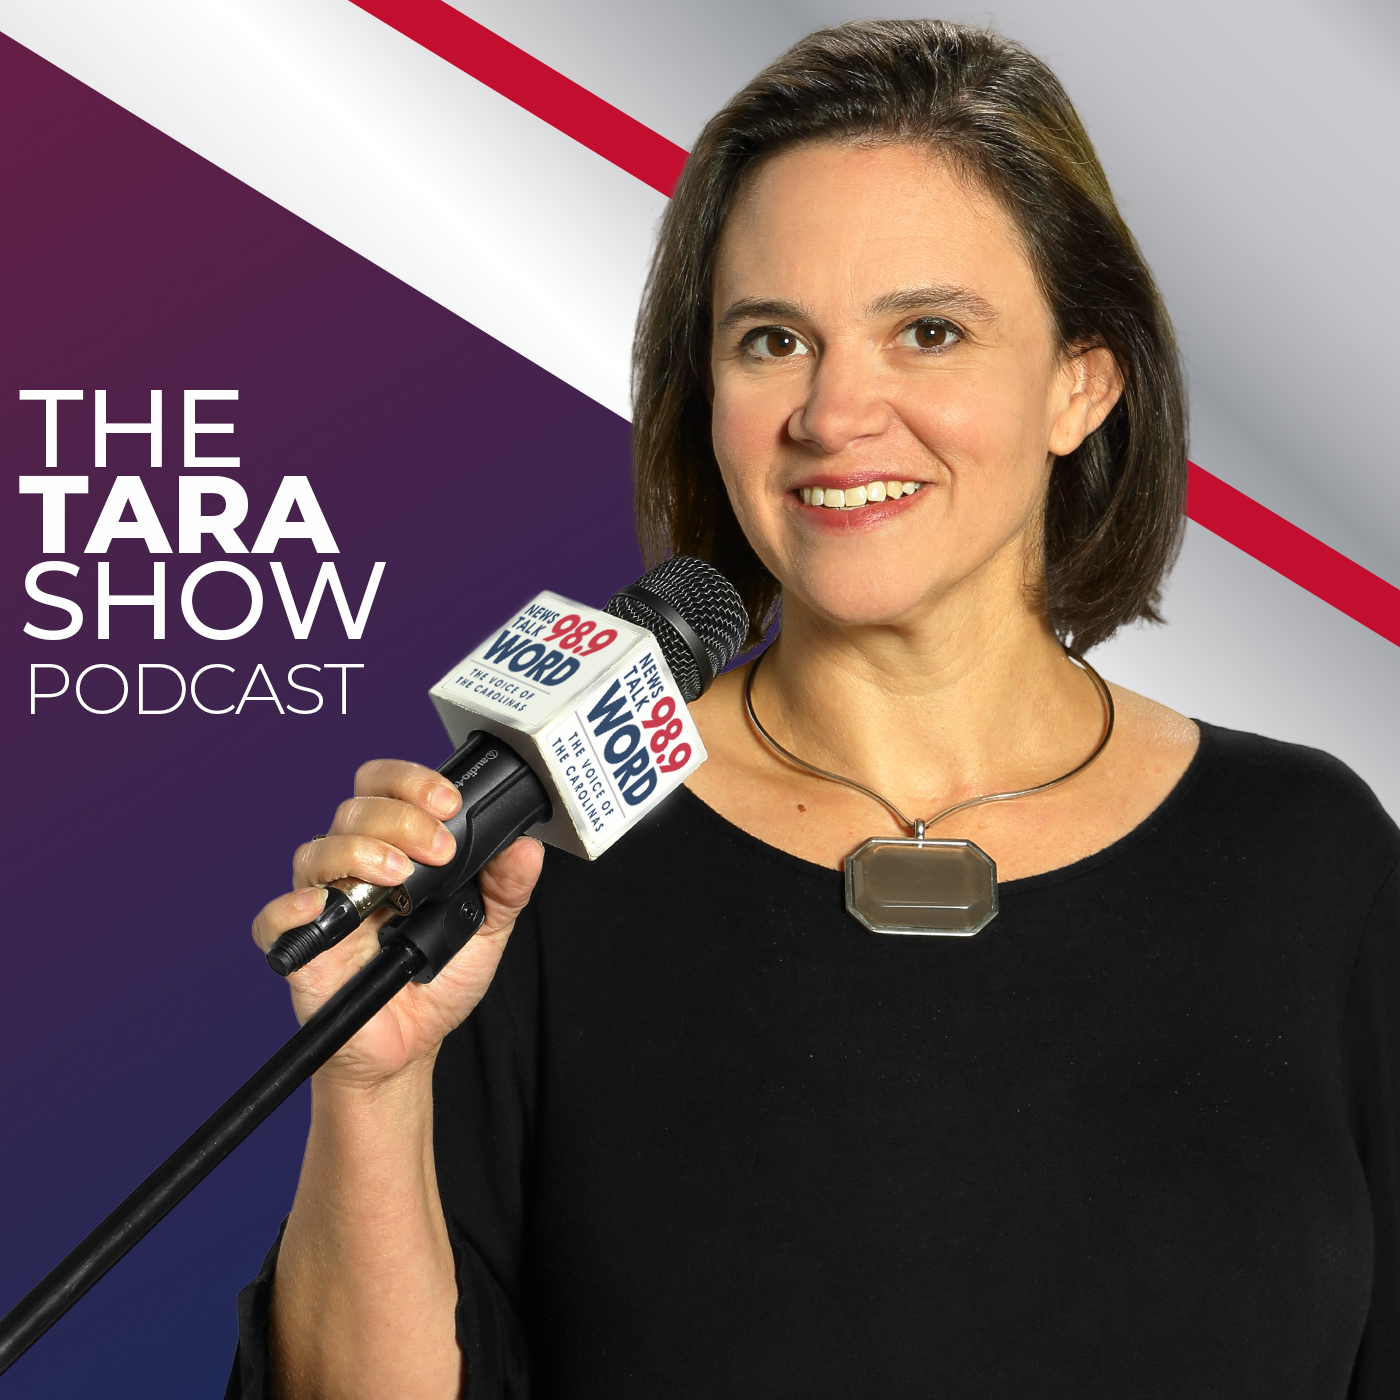 Hour 1: The Tara Show - “The Biggest Fail from Homeland Security” ”Spread the WORD” “The Hatred for Jews on the Left” “The Hard Truth aboutBlue vs Red”